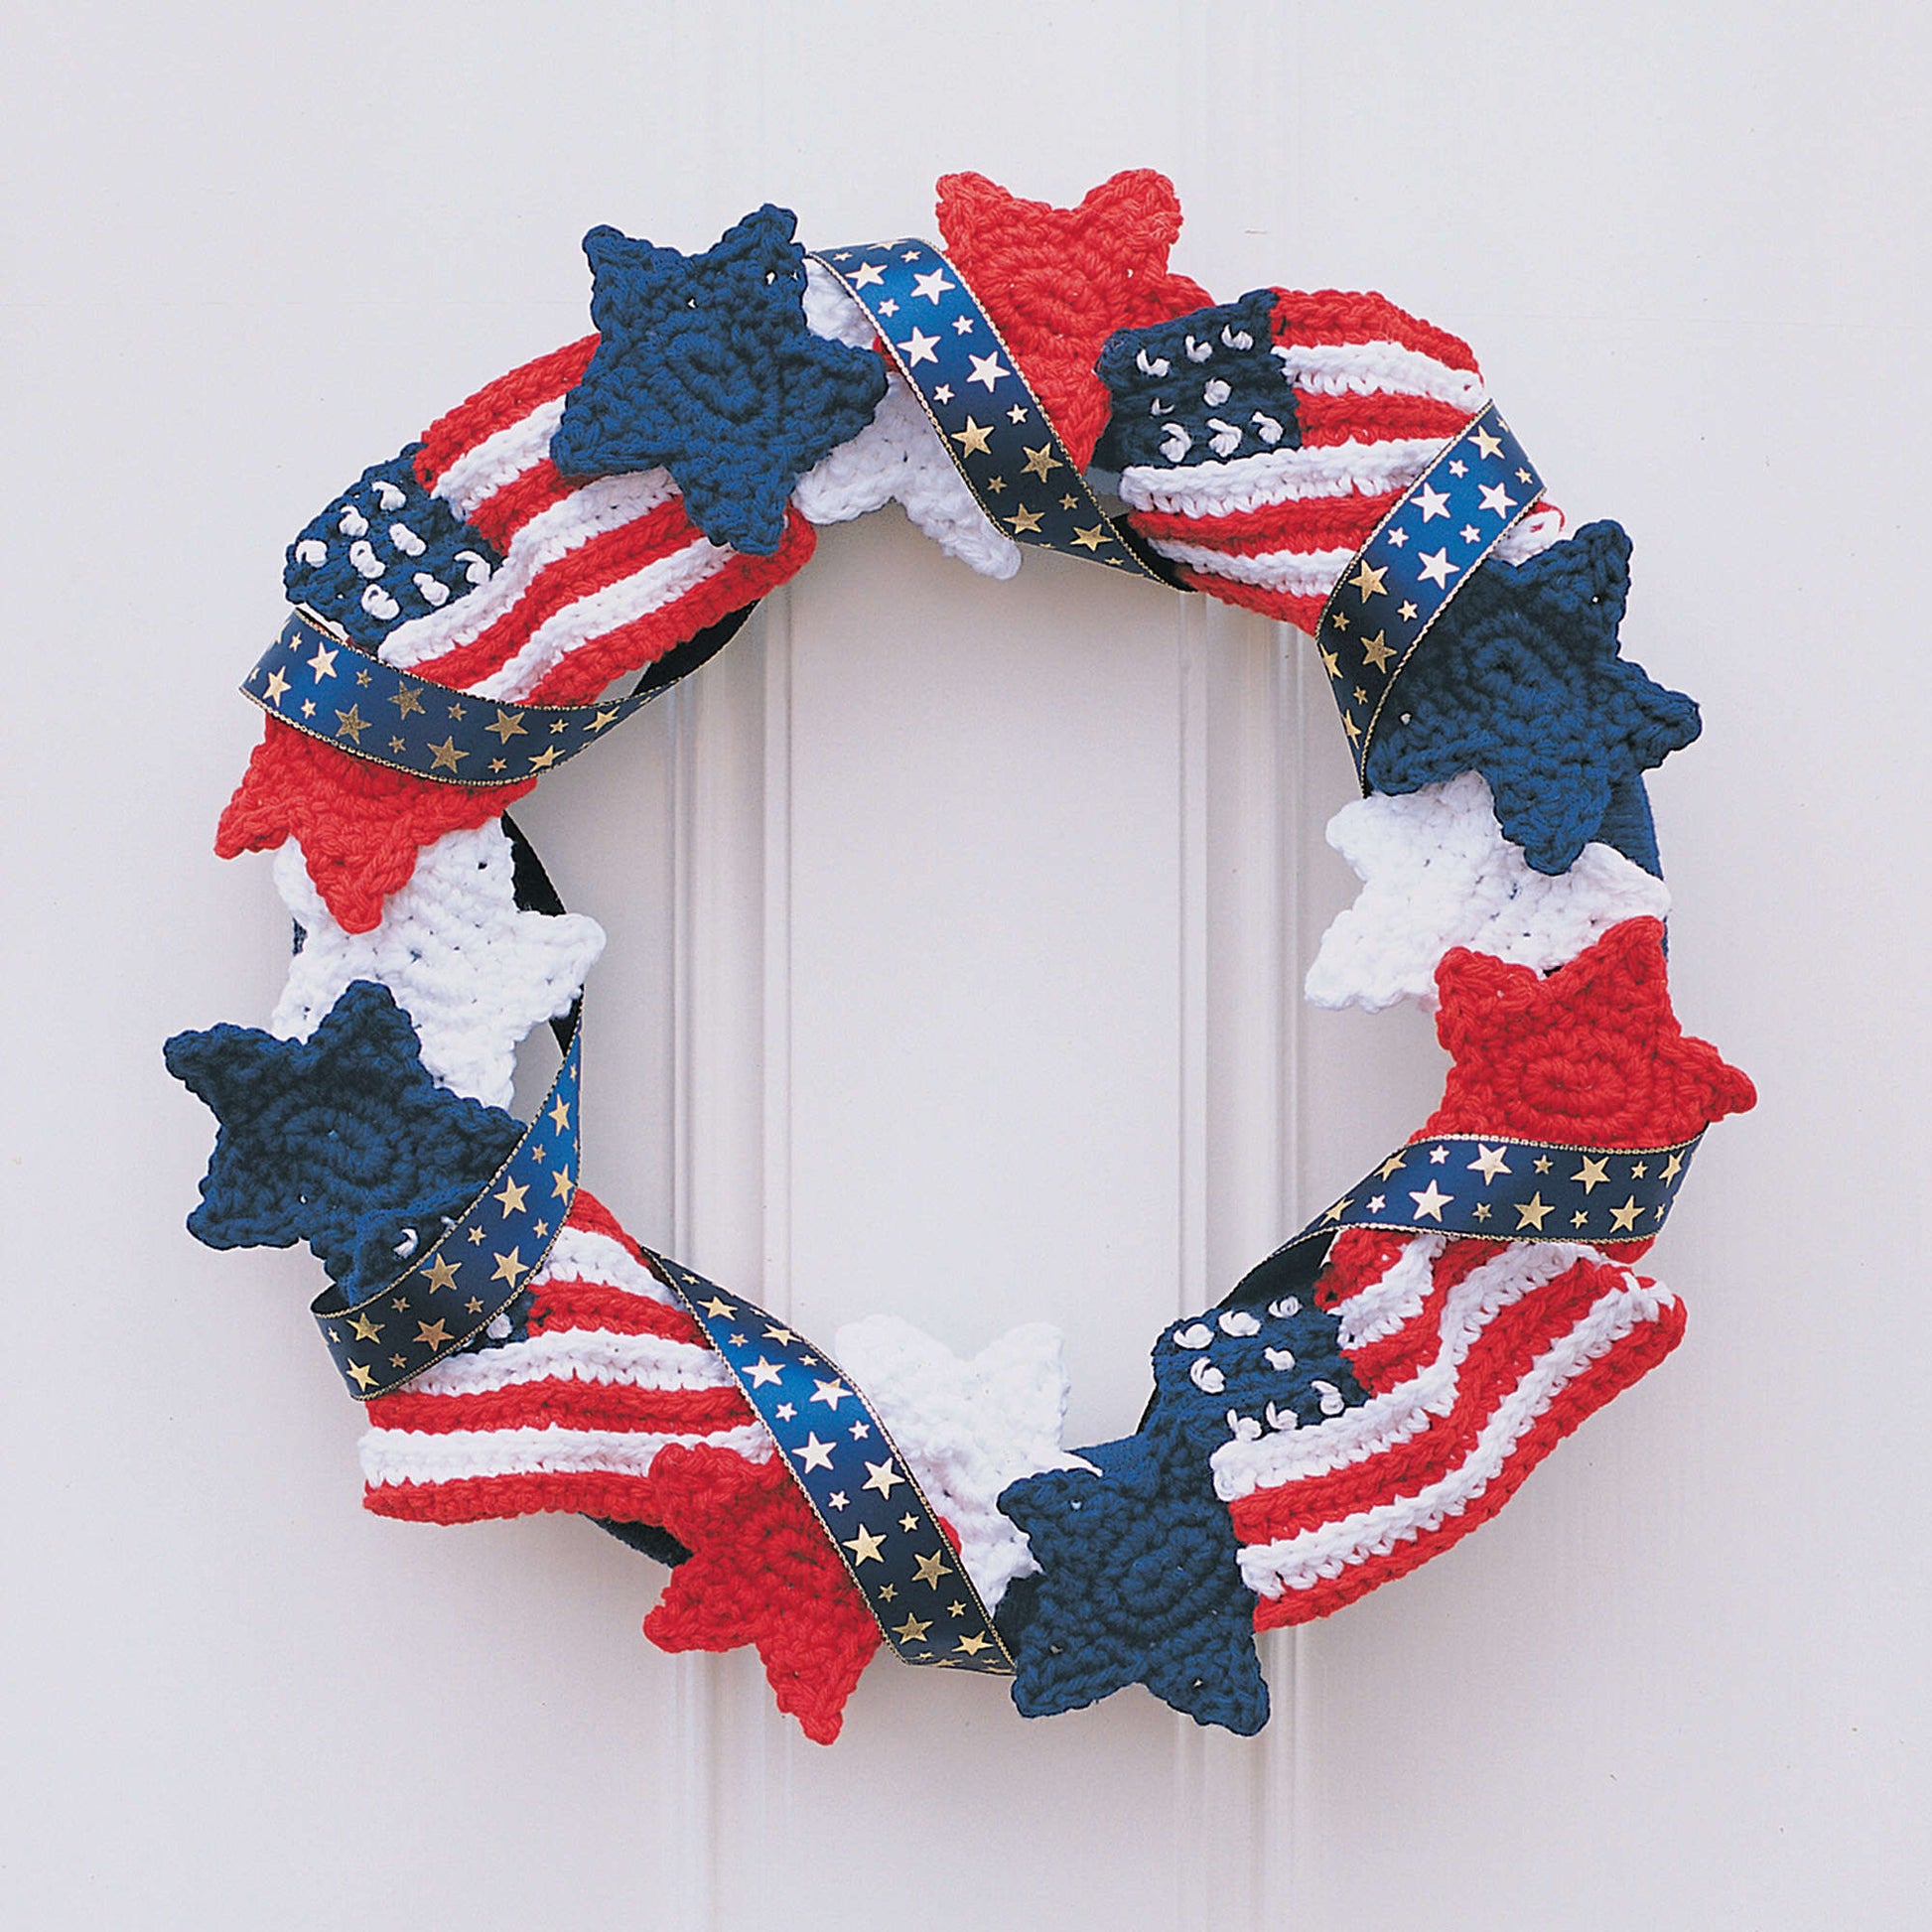 Free Lily Sugar'n Cream Stars and Stripes Forever Crochet Pattern